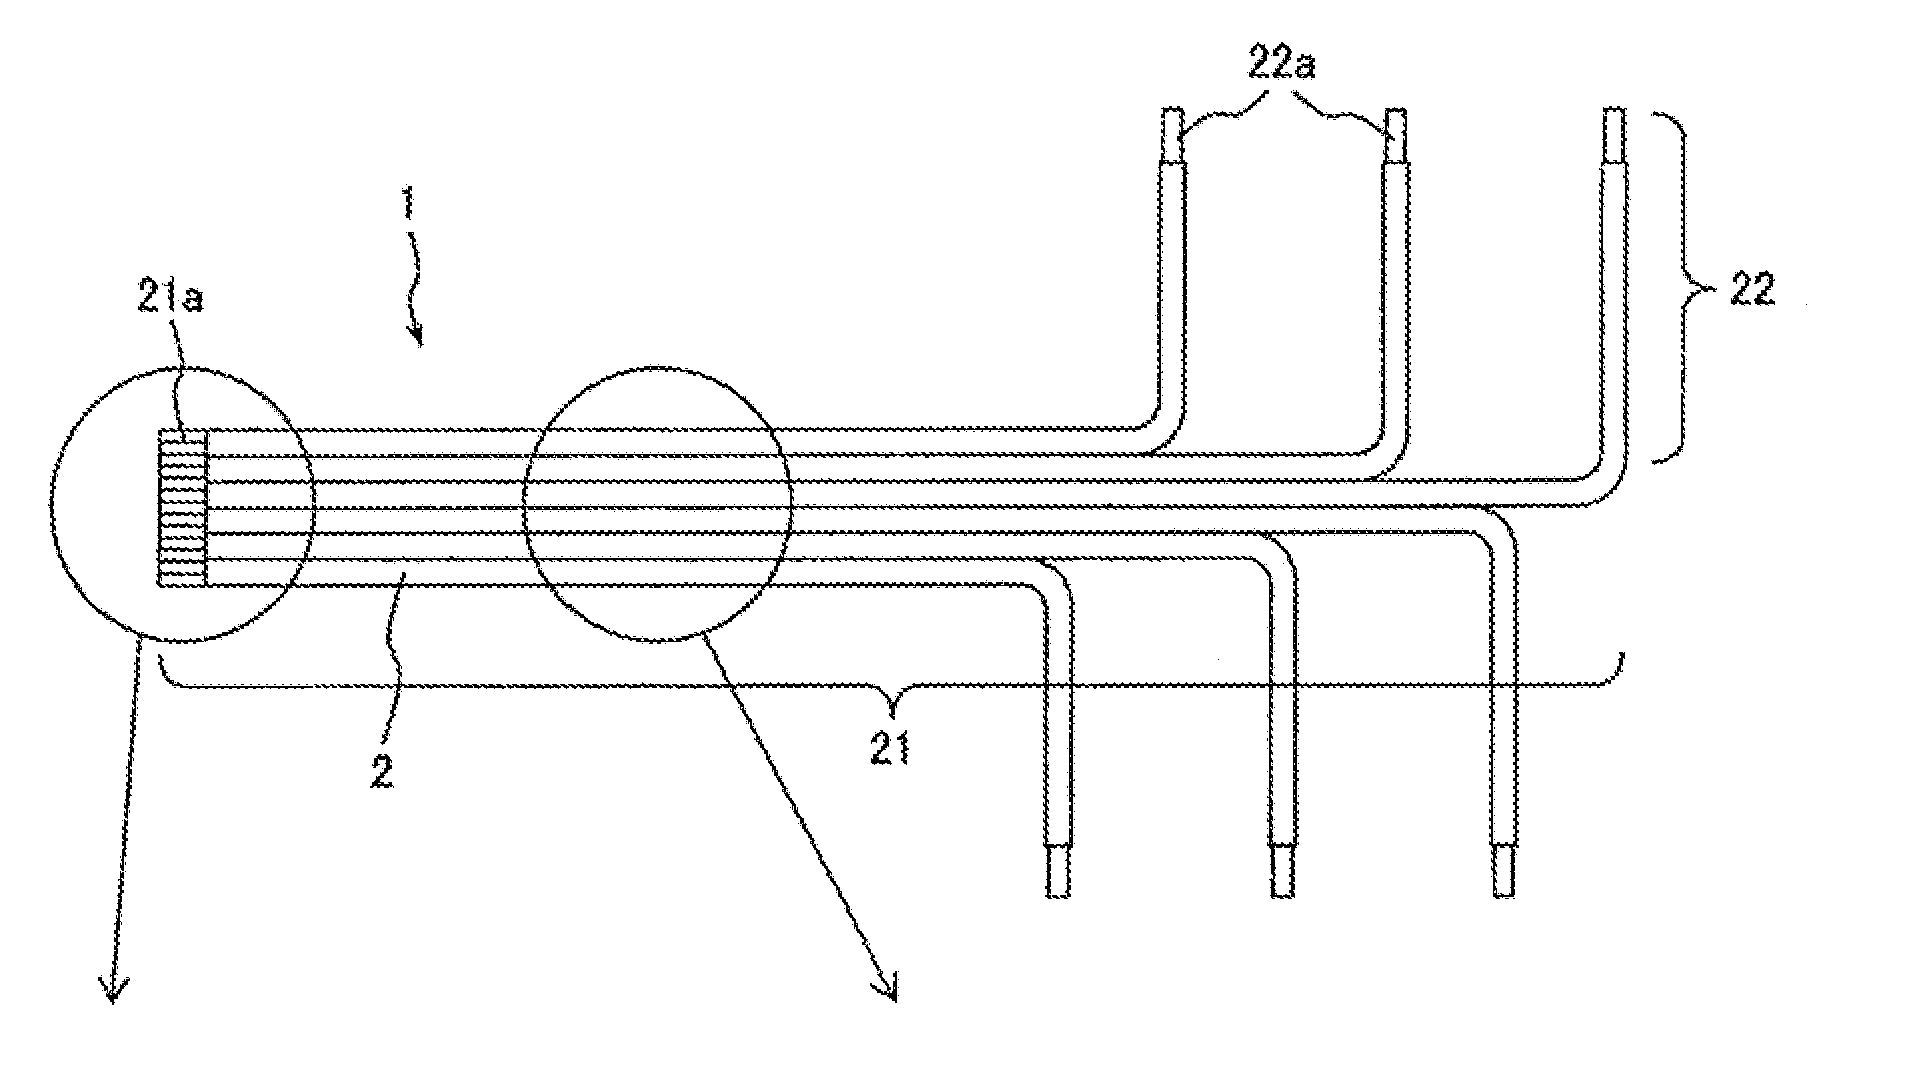 Flat wiring member and method of manufacturing the same